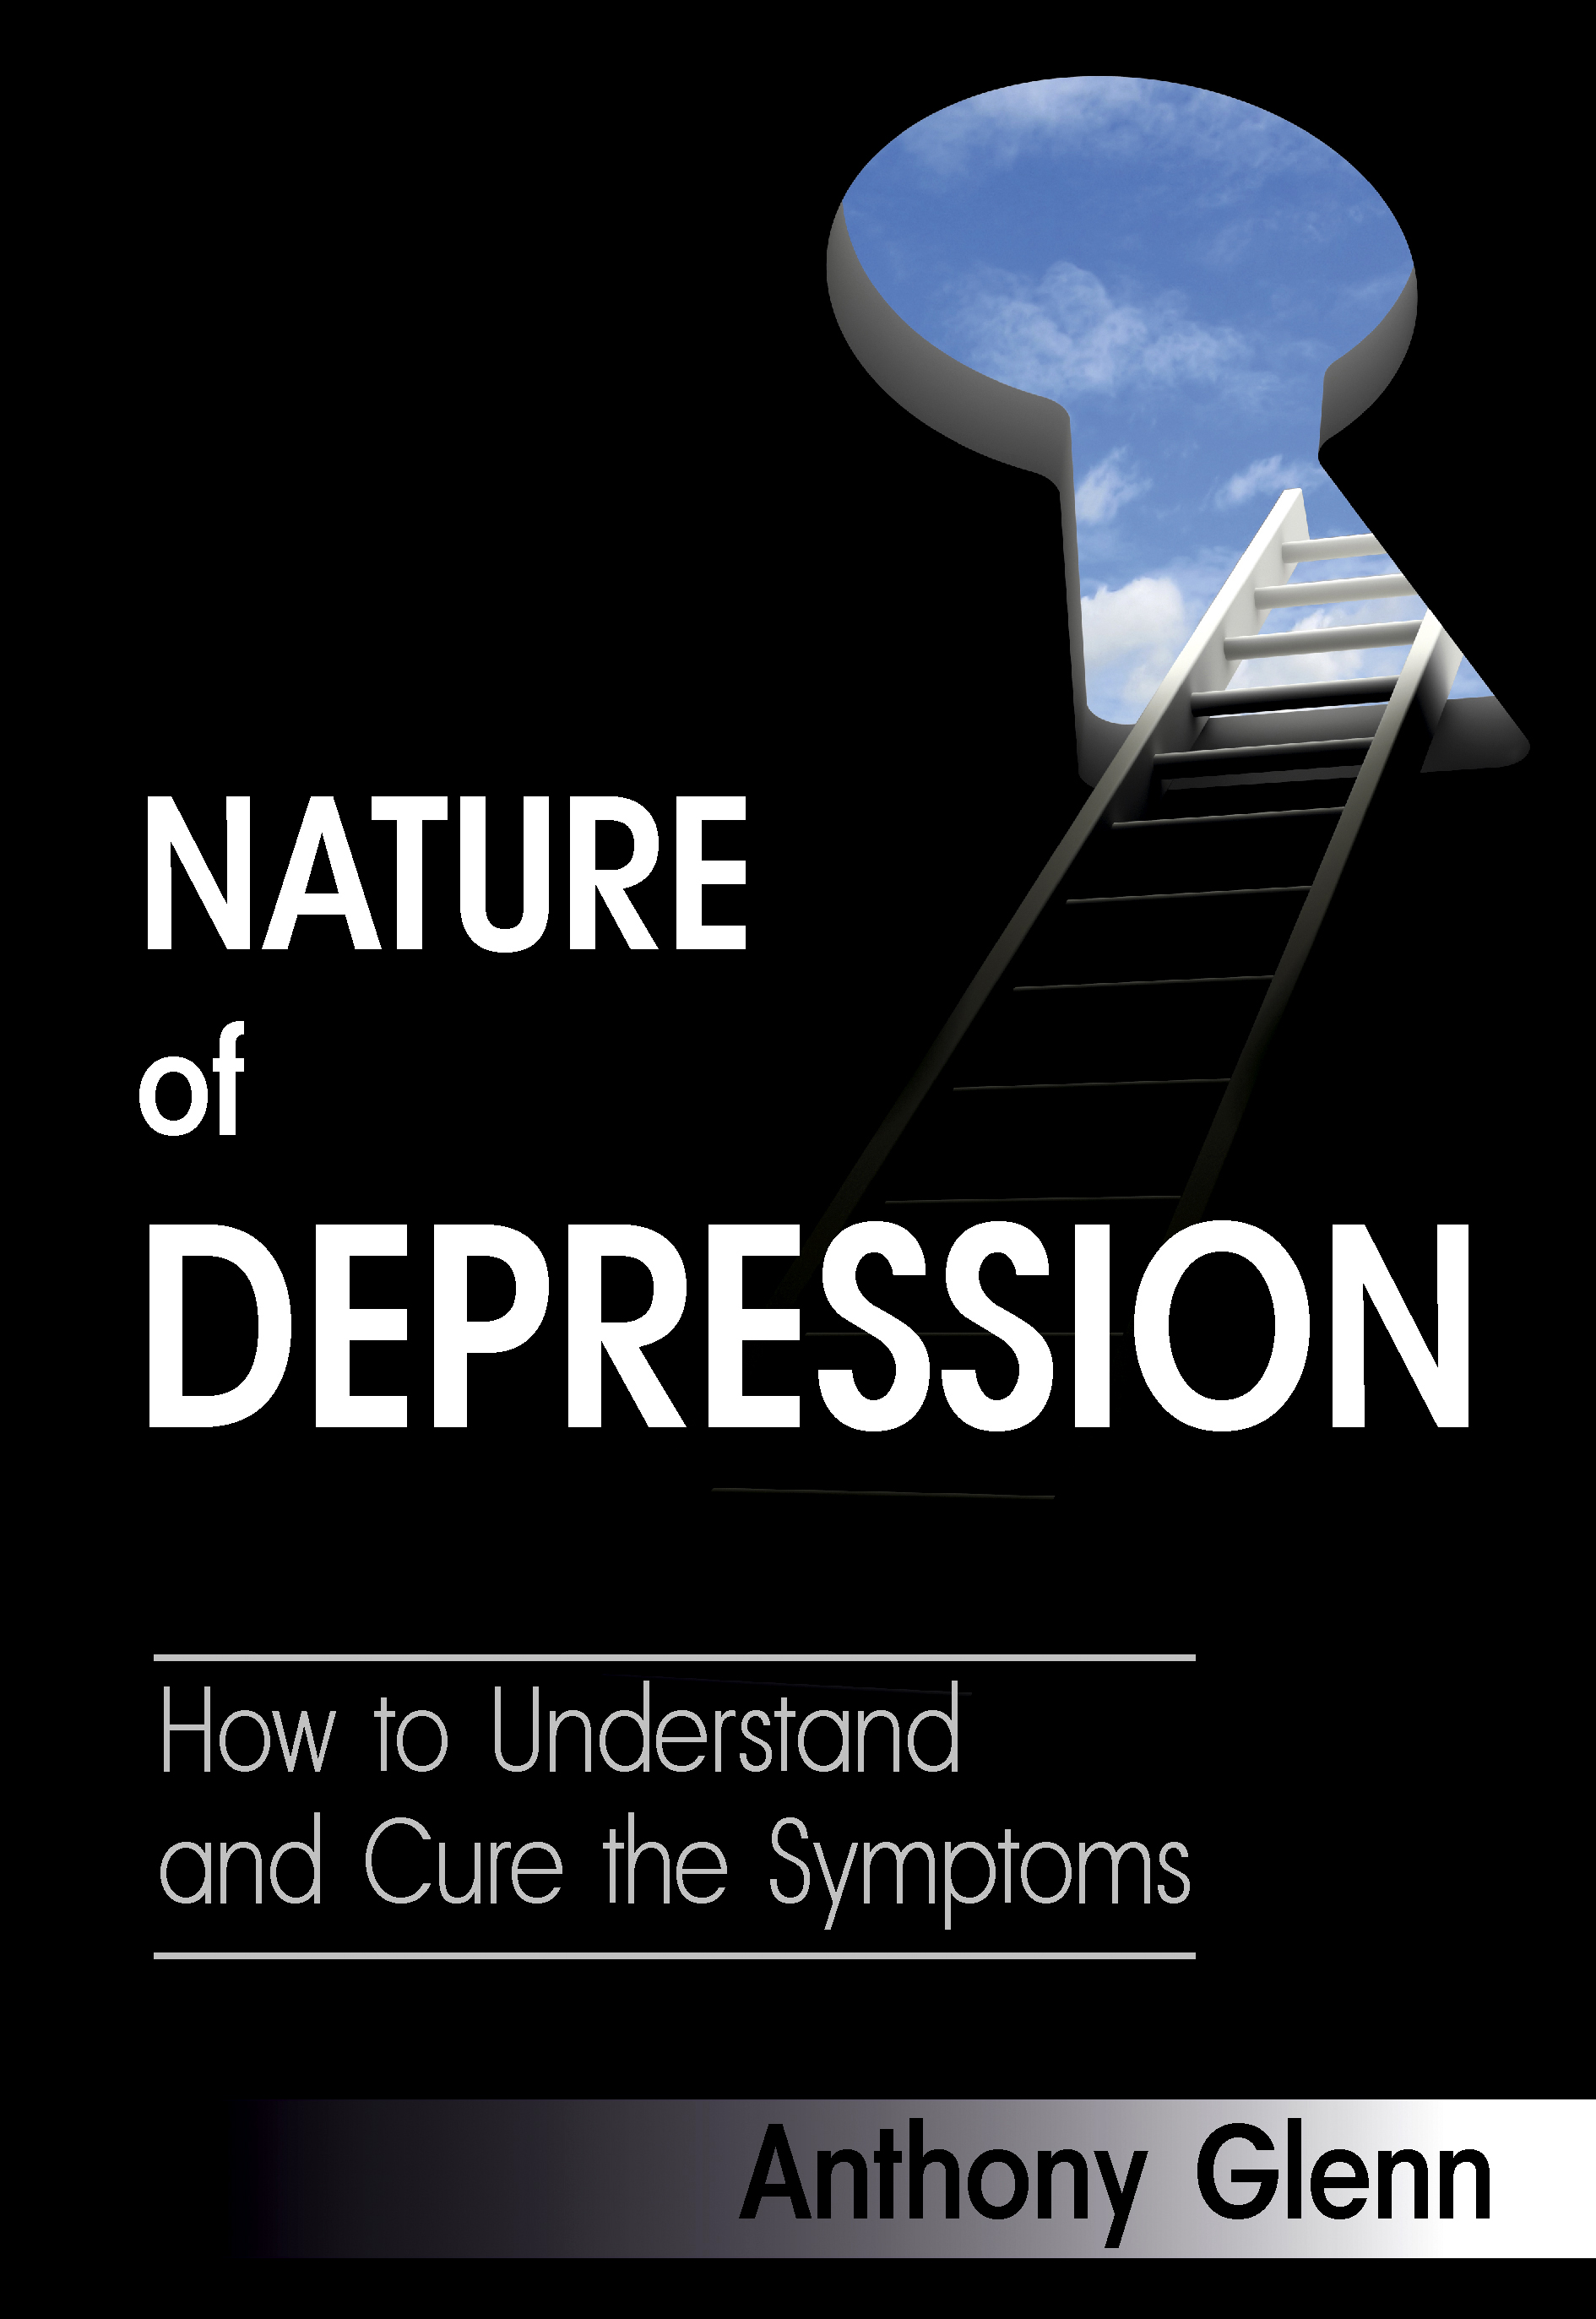 FREE: Nature of Depression: How to Understand and Cure the Symptoms by Anthony Glenn